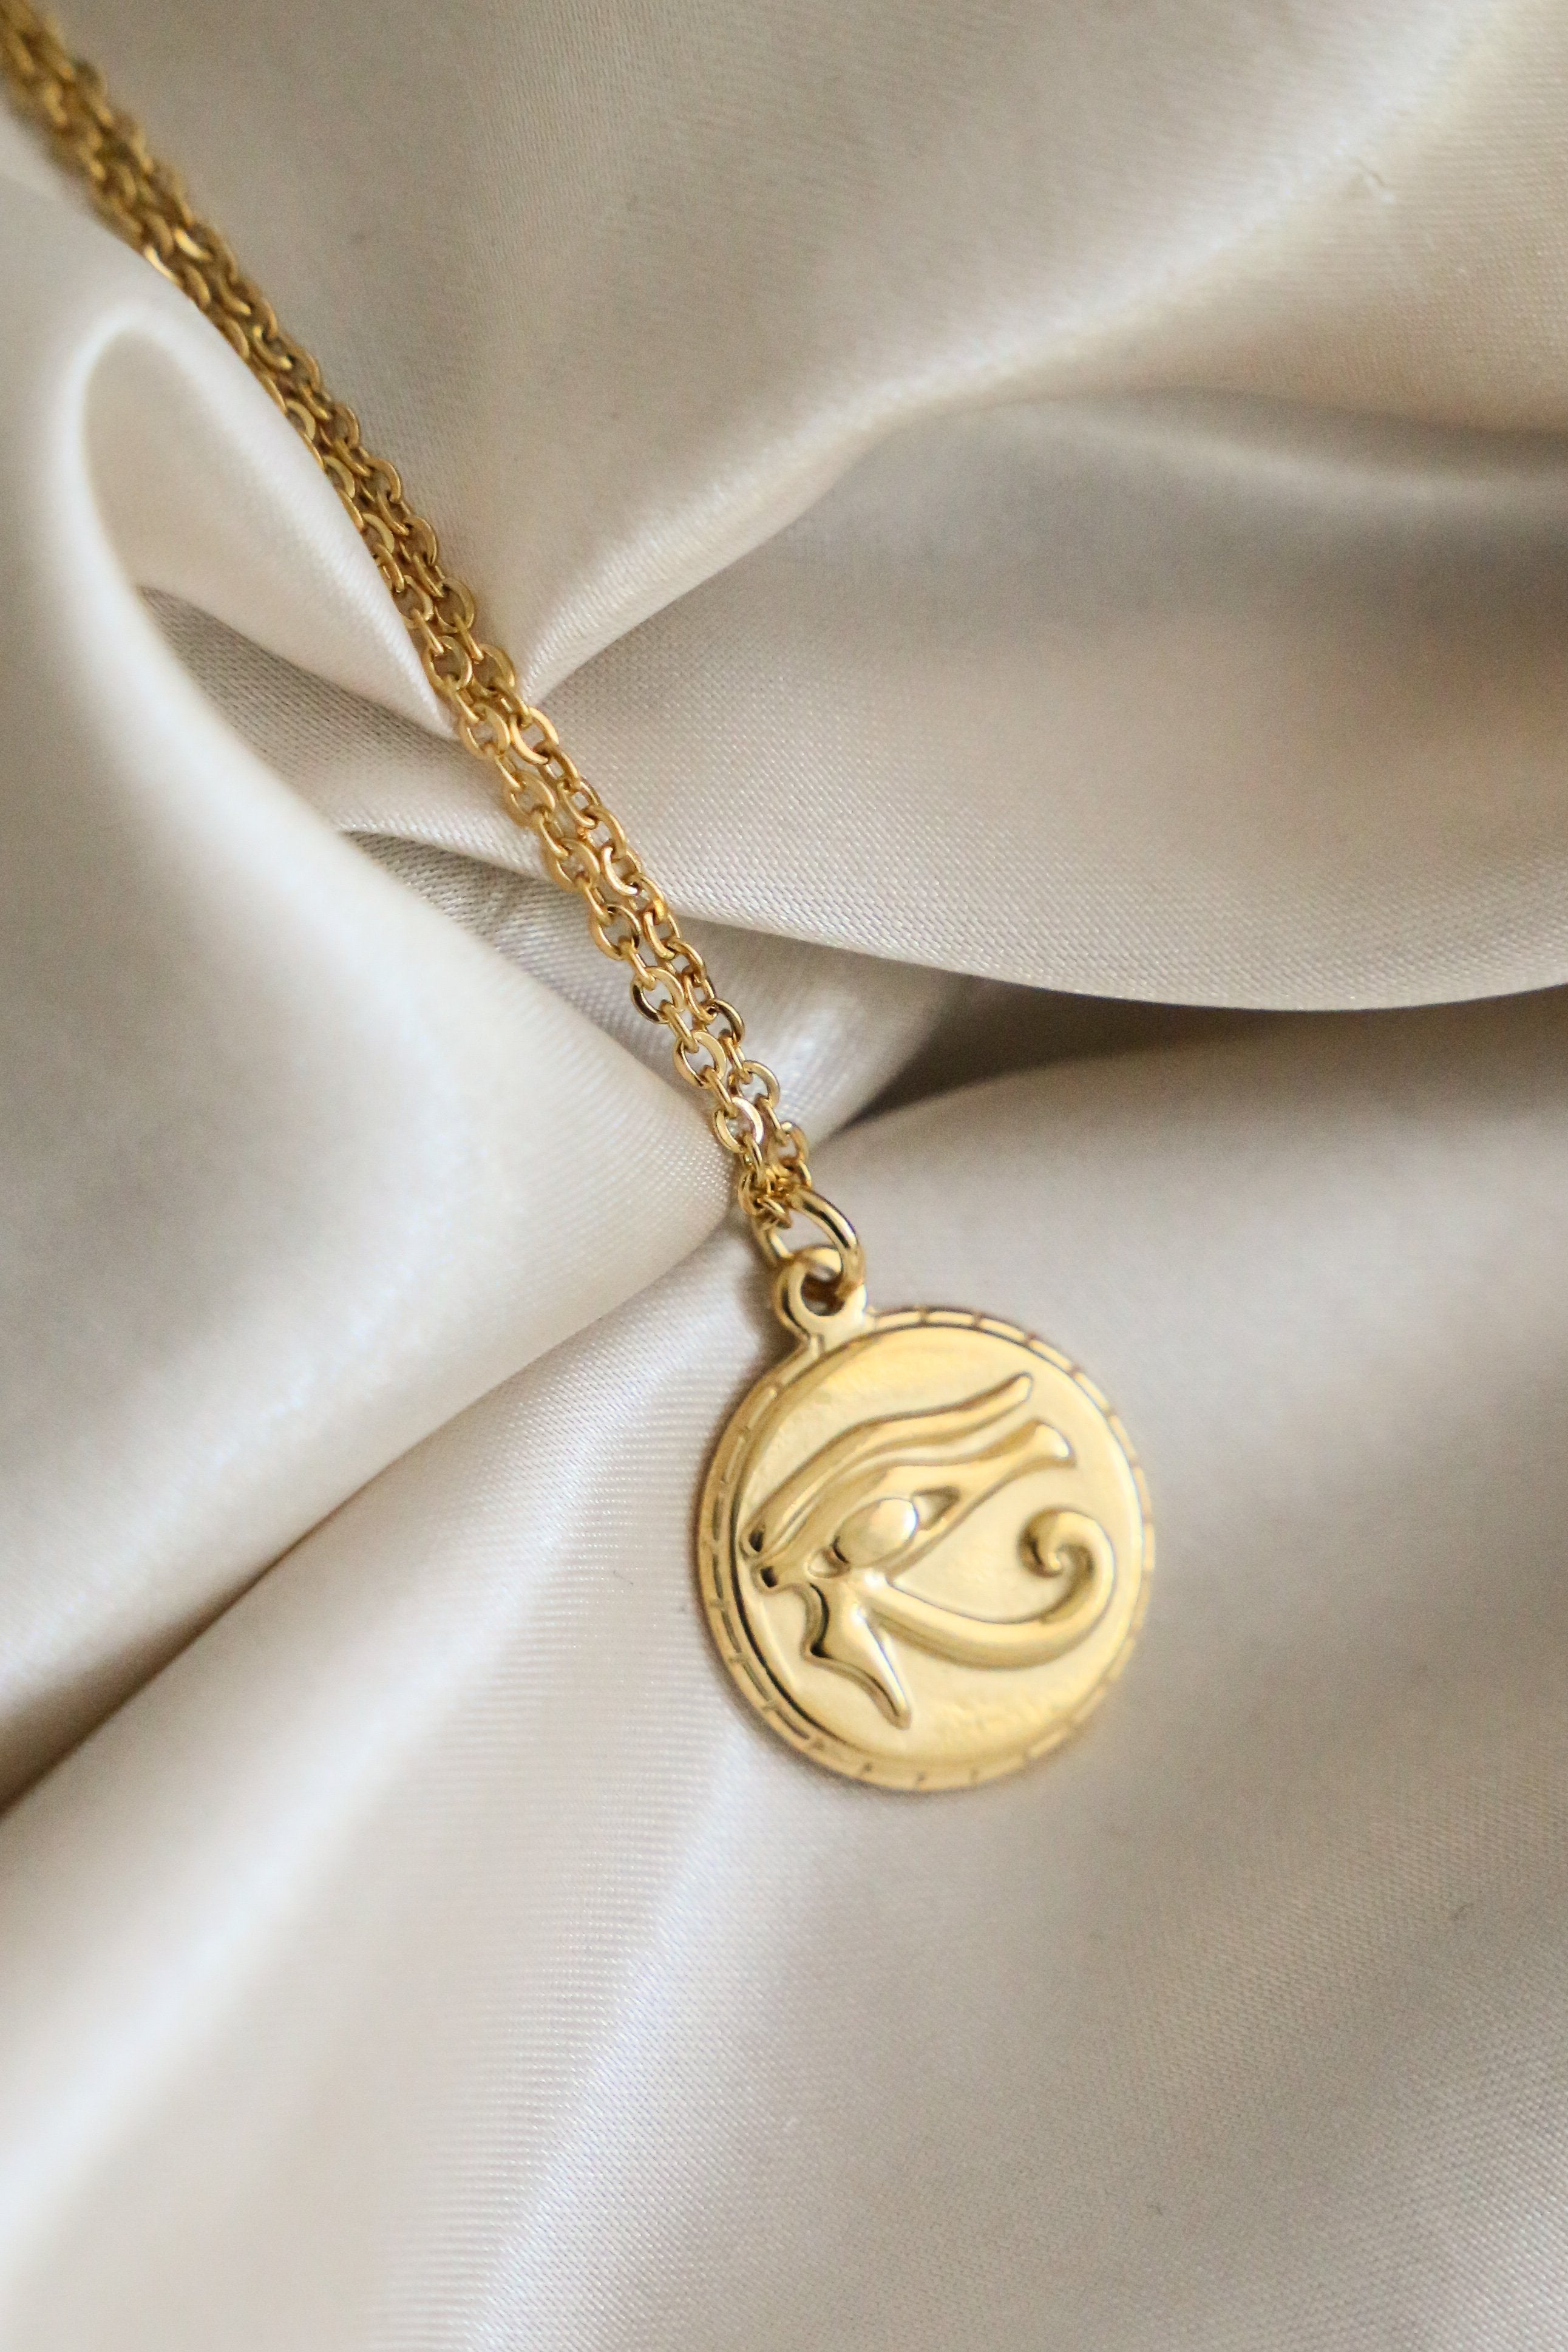 Eye of Horus Necklace - Boutique Minimaliste has waterproof, durable, elegant and vintage inspired jewelry